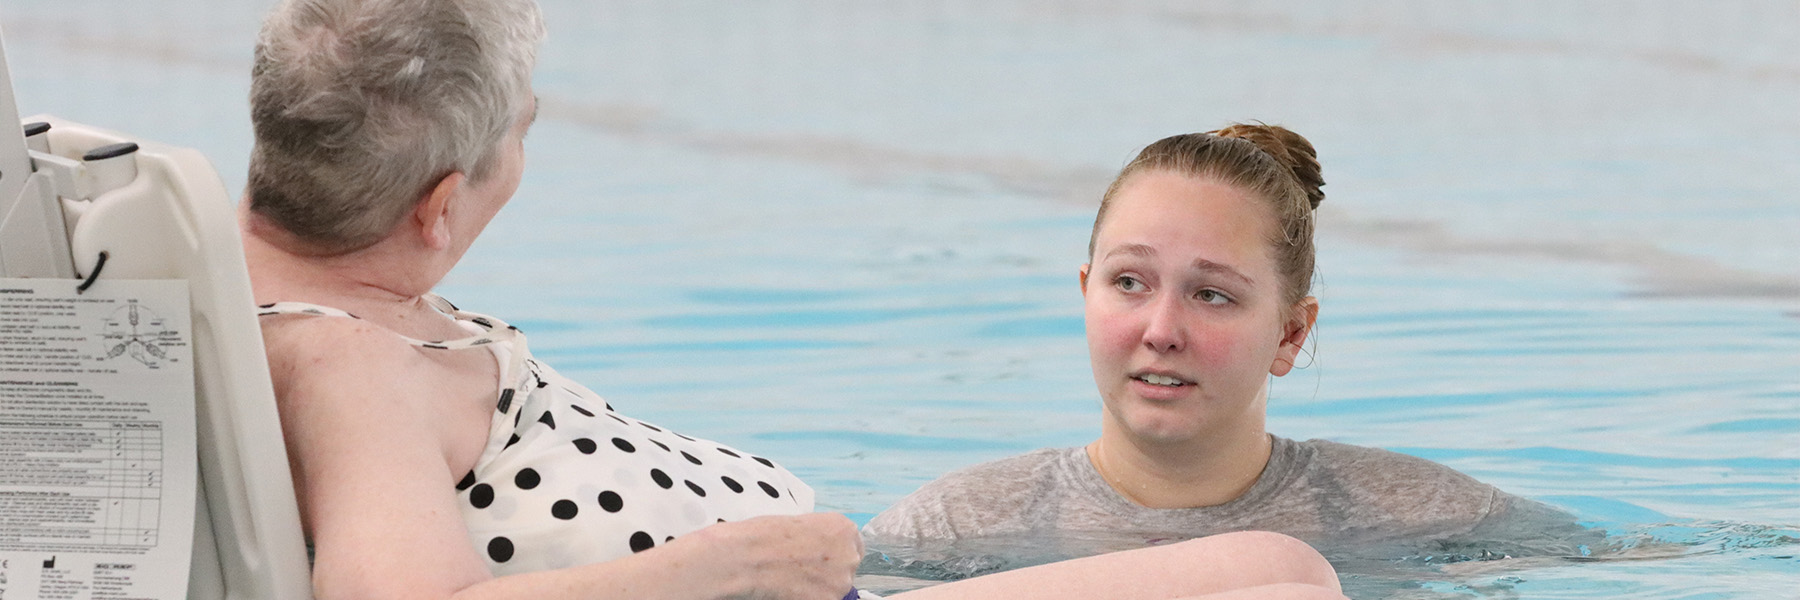 A student working with an older patient during a swim class